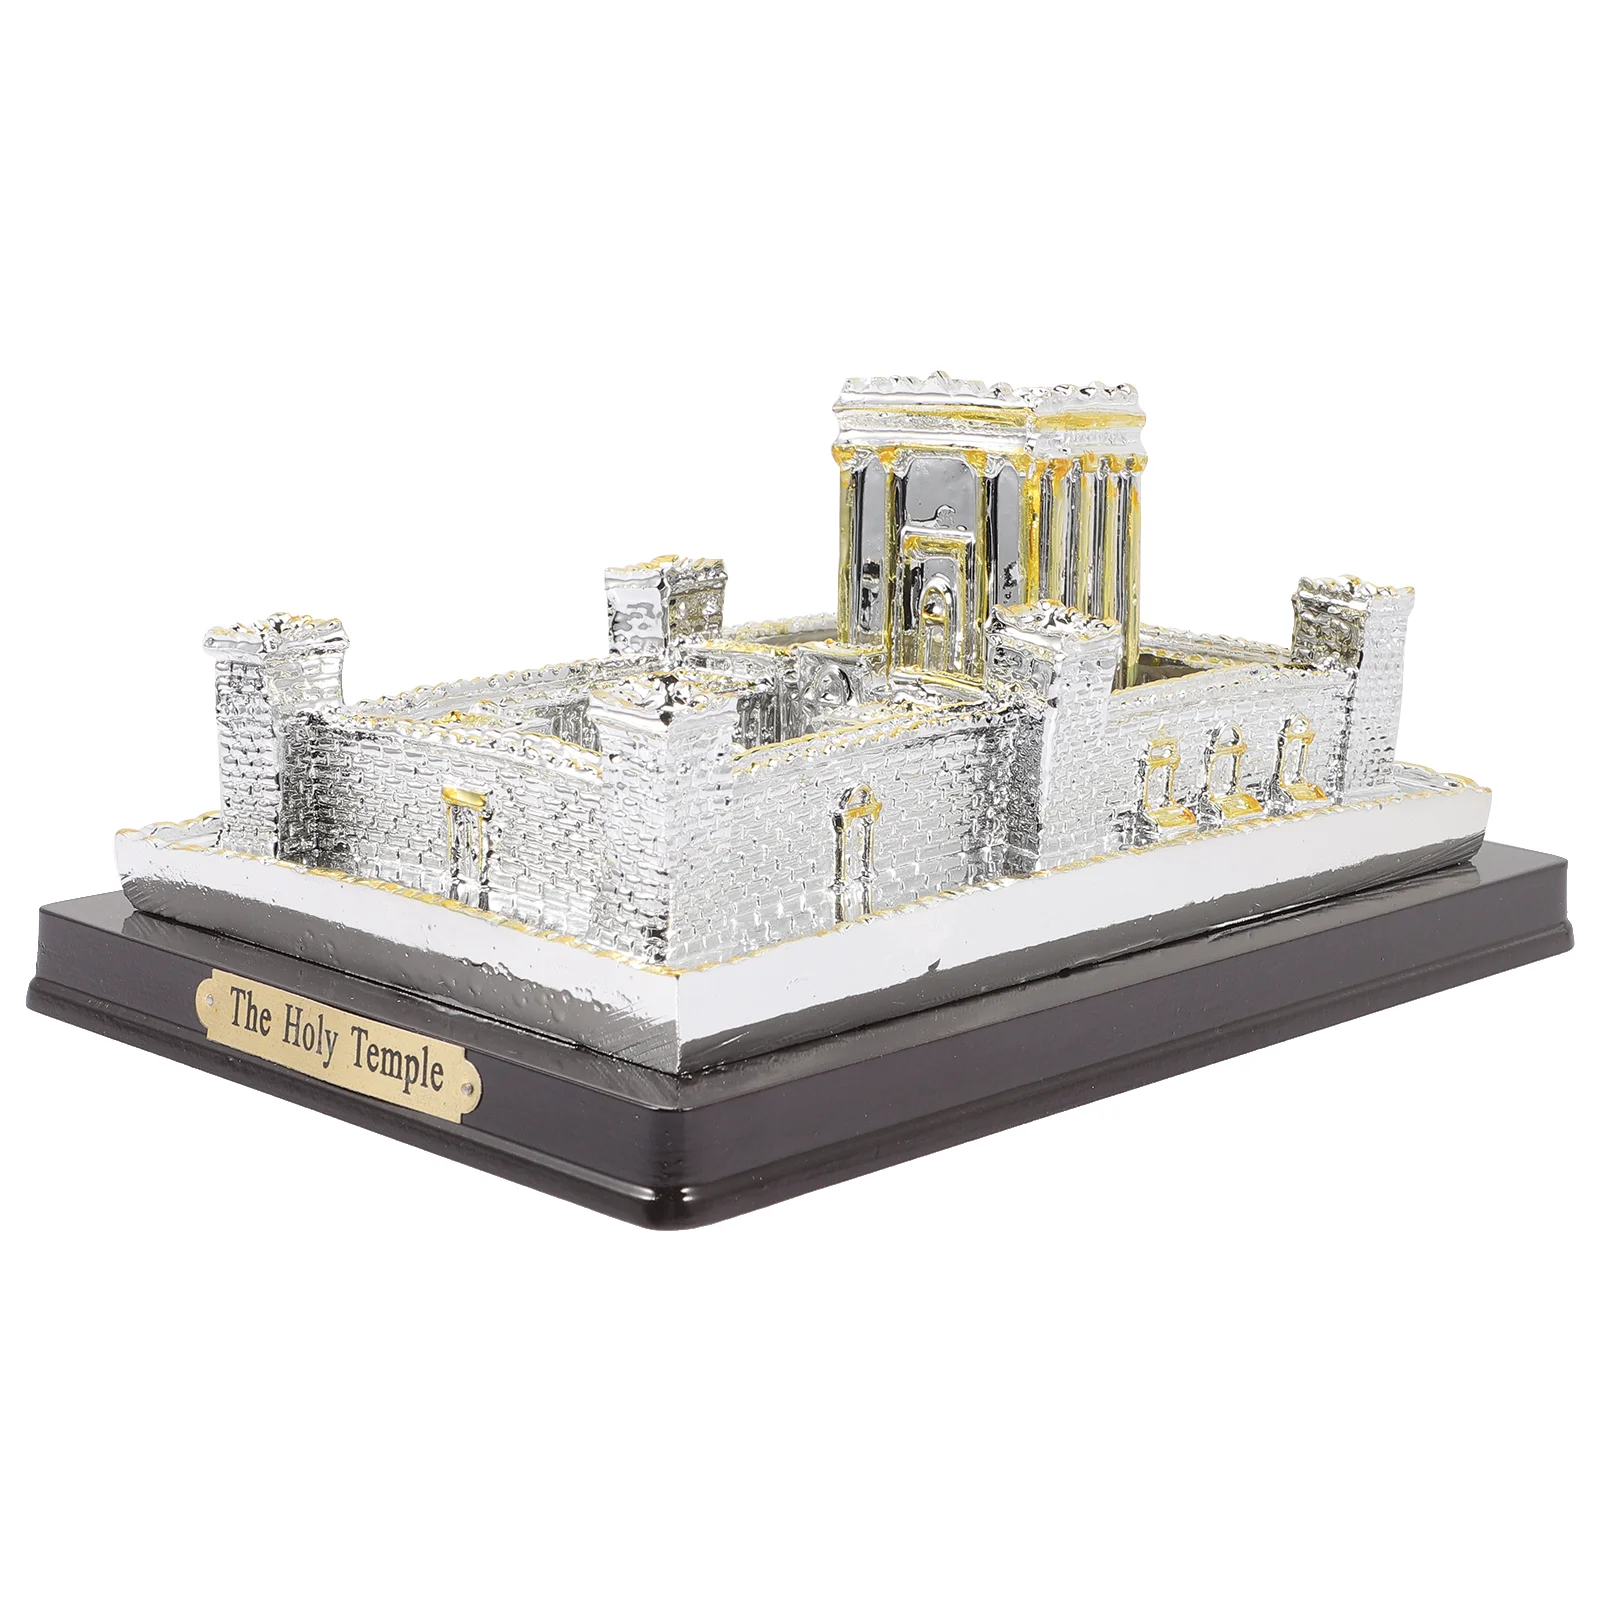 

Church Ornaments Holy Temple Statue Faith Resin Crafts Household Sculpture Home Supplies Figurines Decor